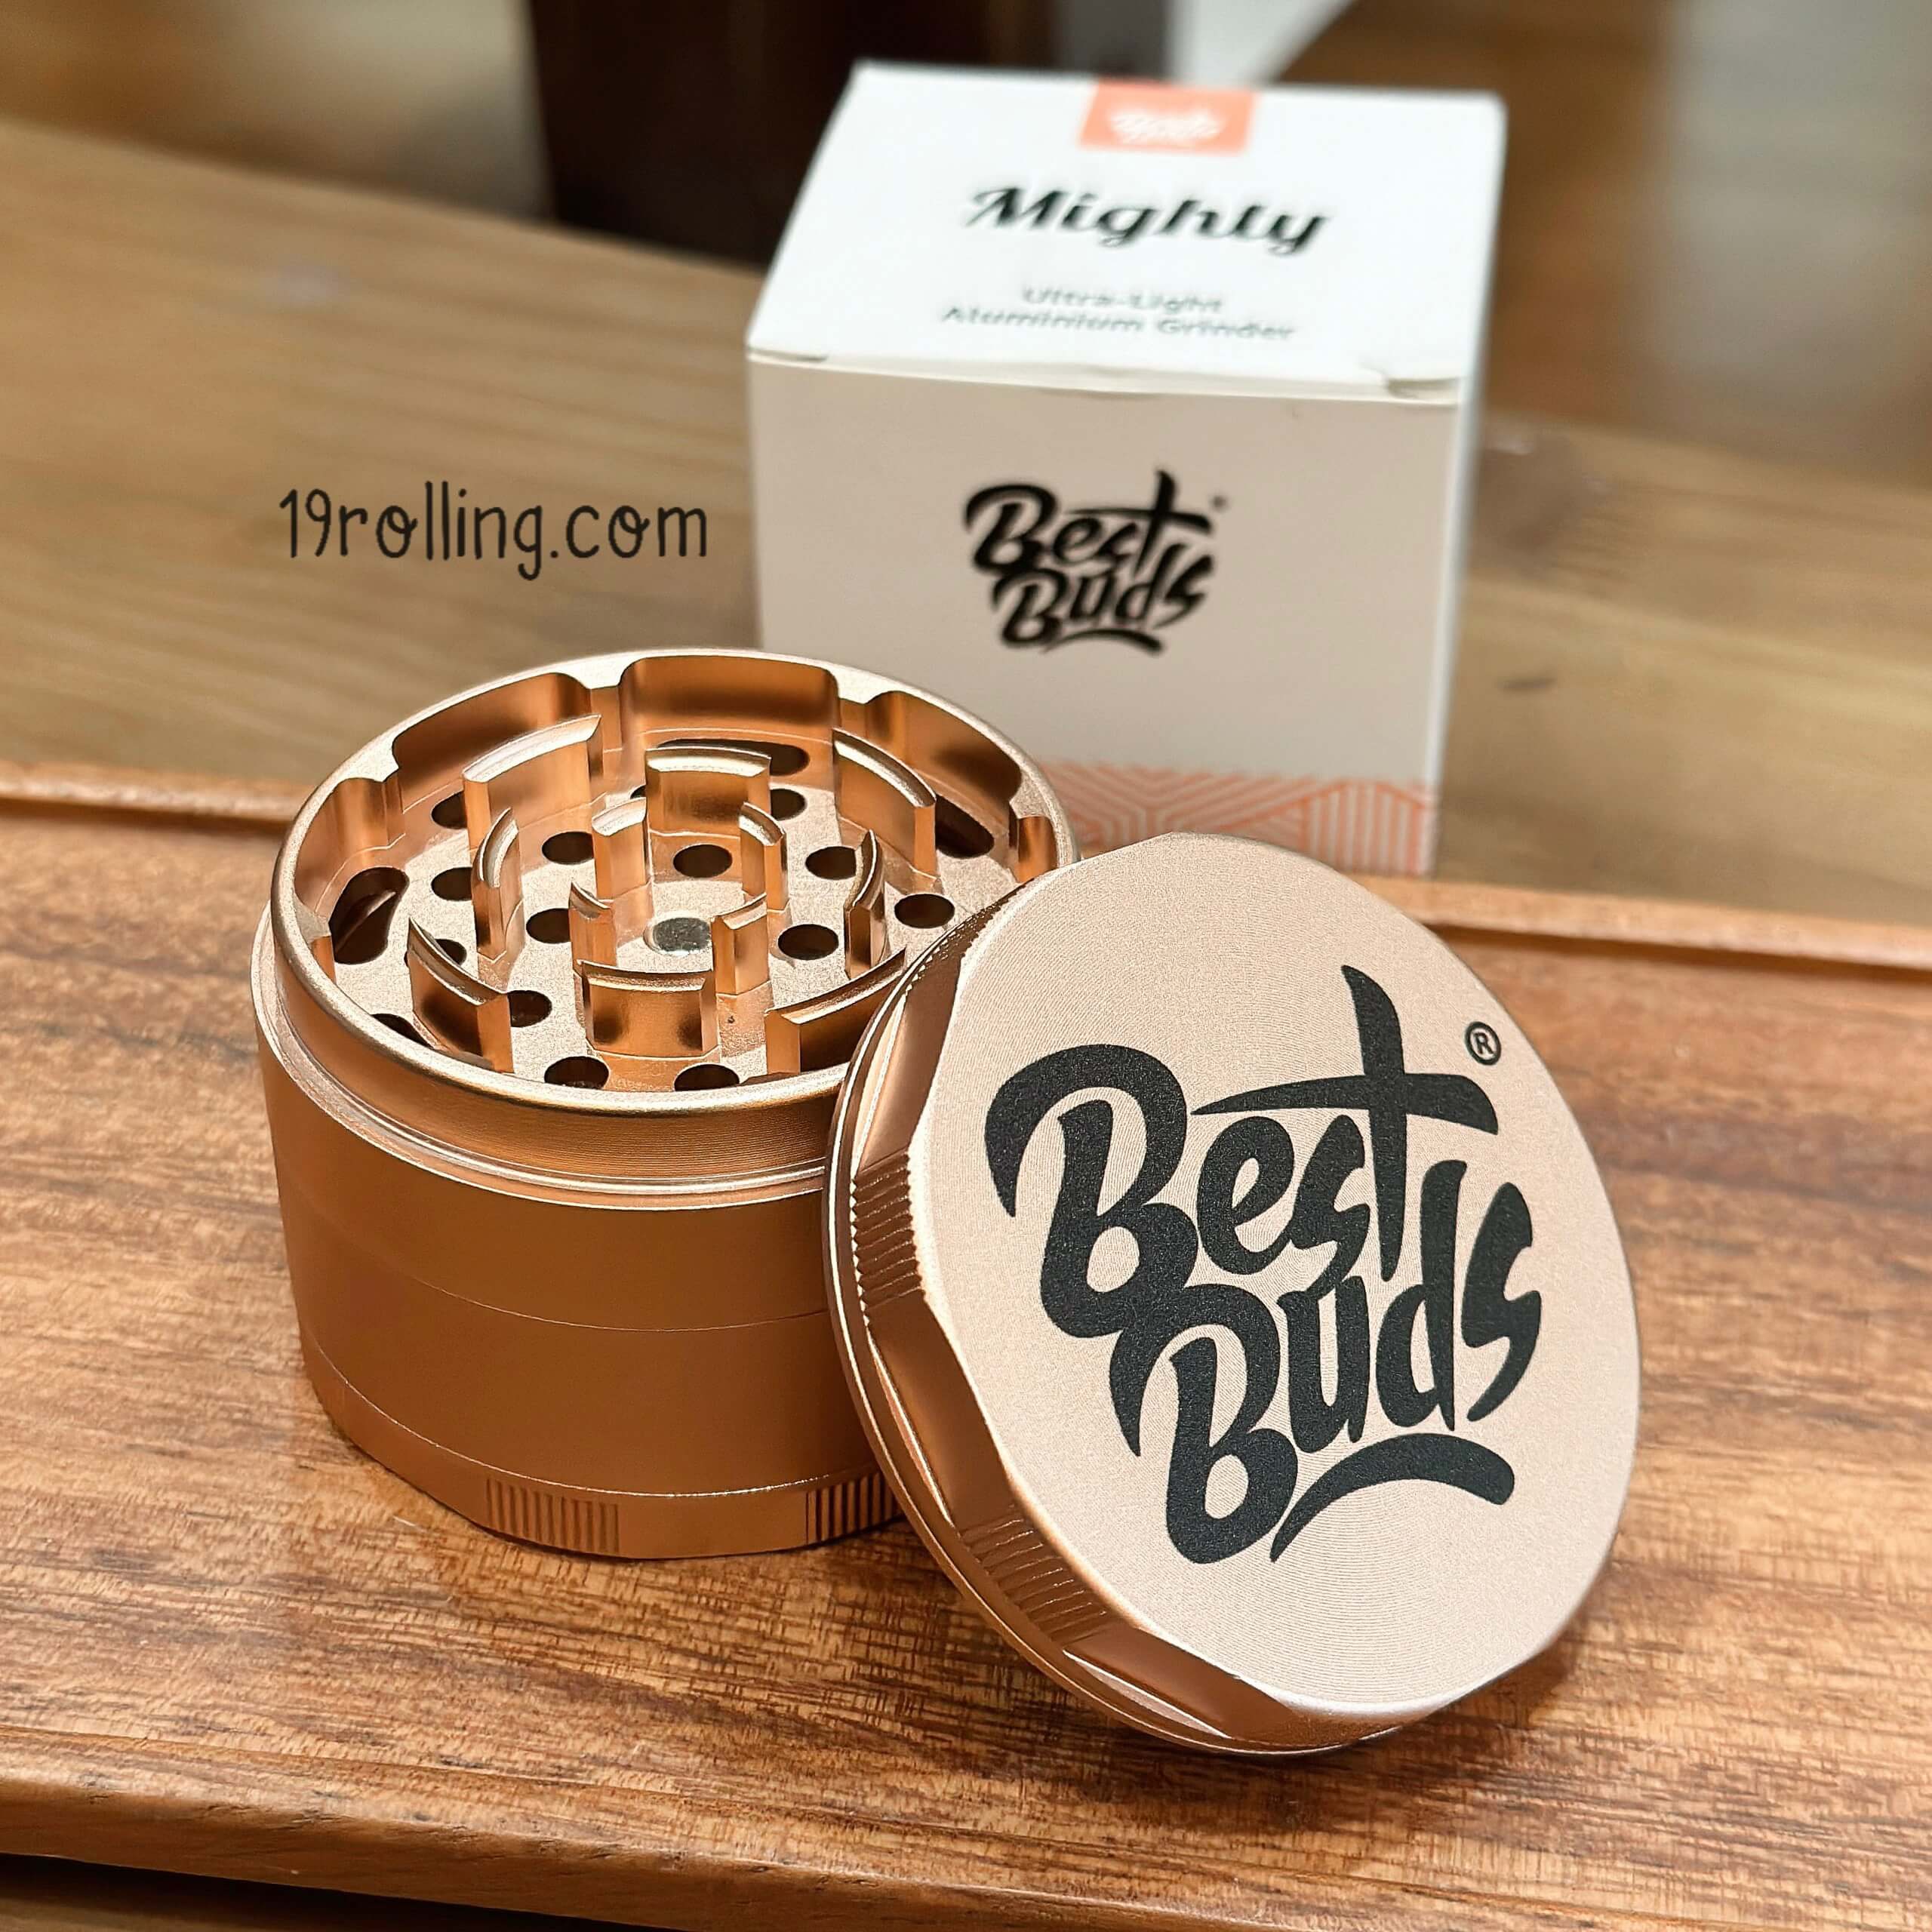 60MM-Best-Buds-Mighty-Rose-GOLD-4-Pieces